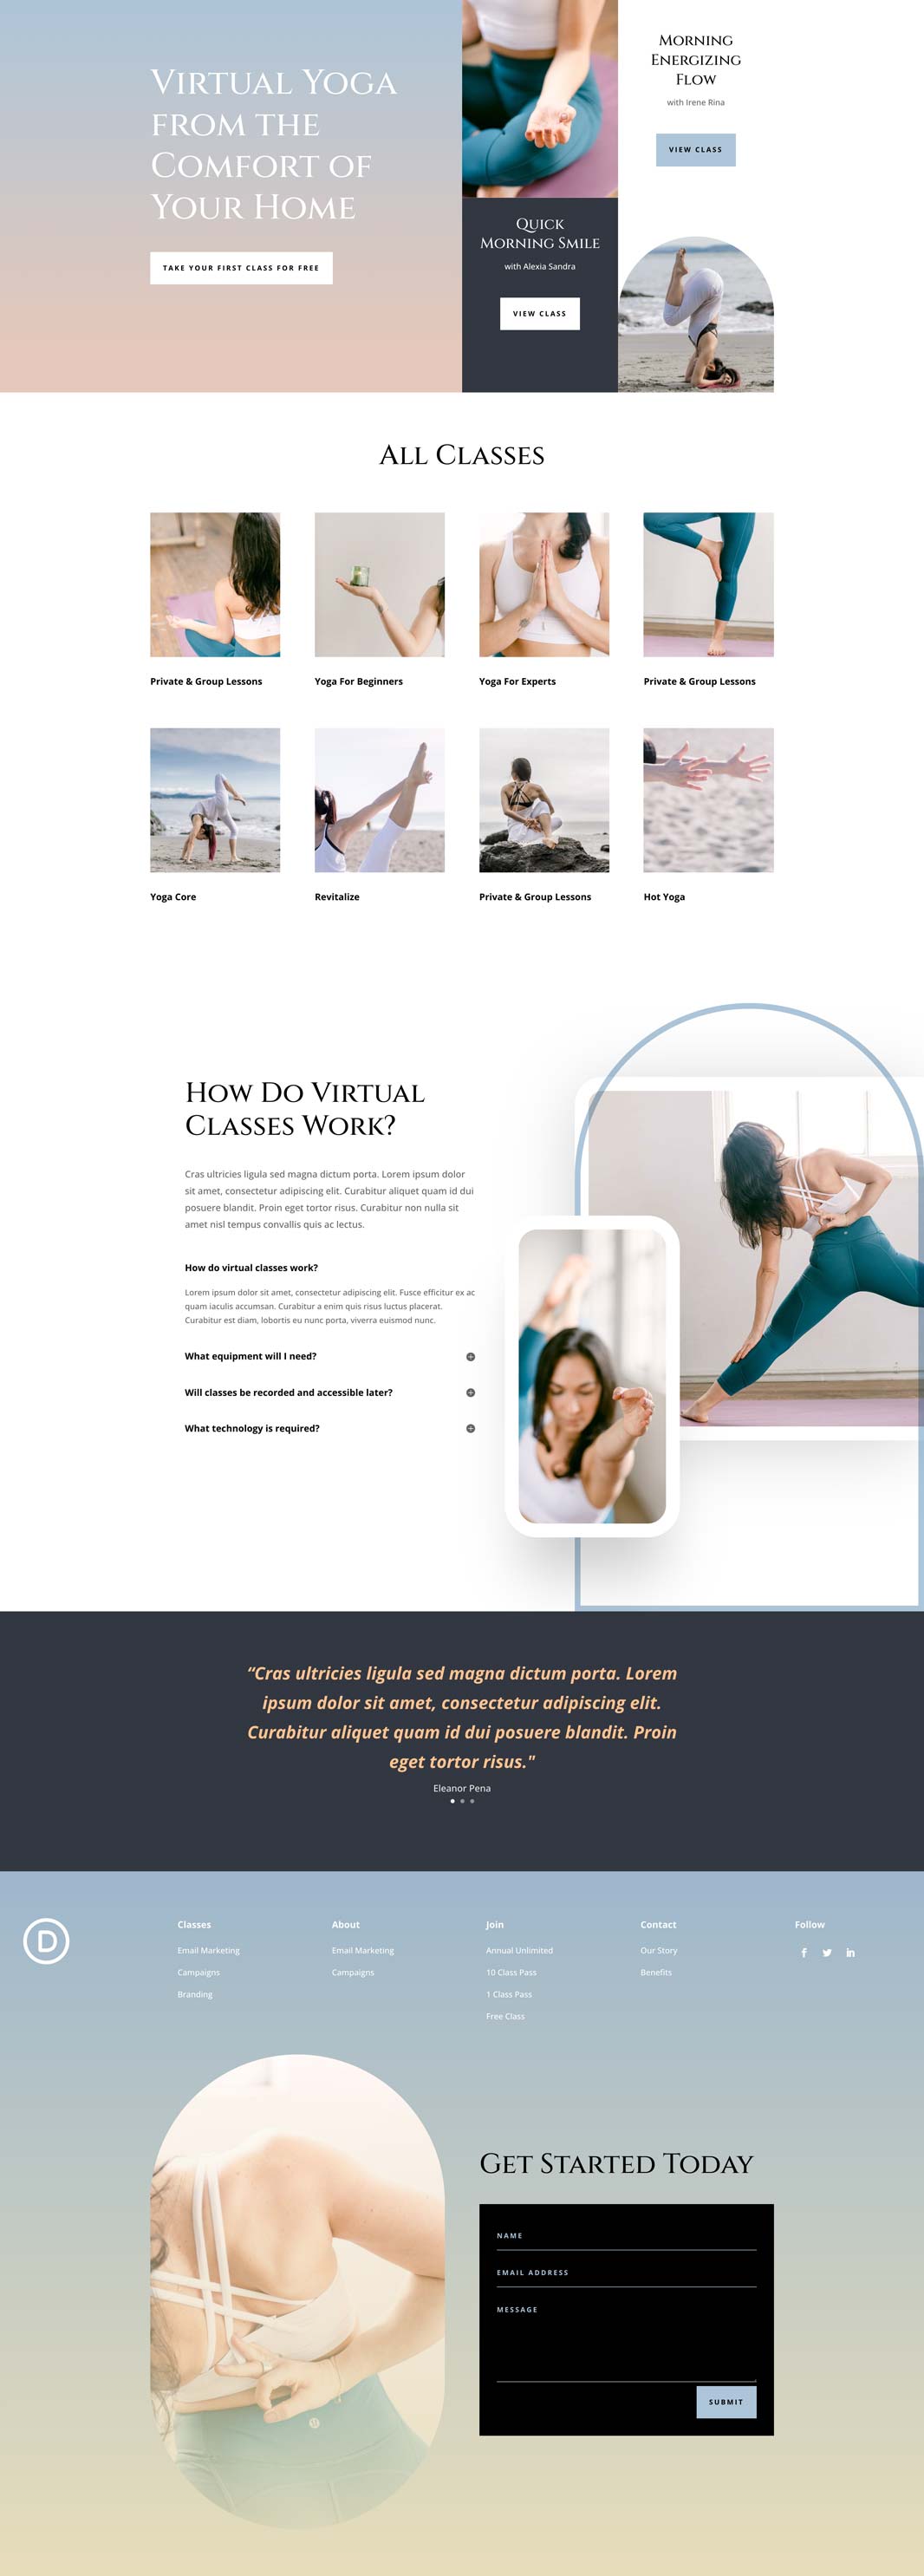 Online Yoga Home Page Divi Layout by Elegant Themes